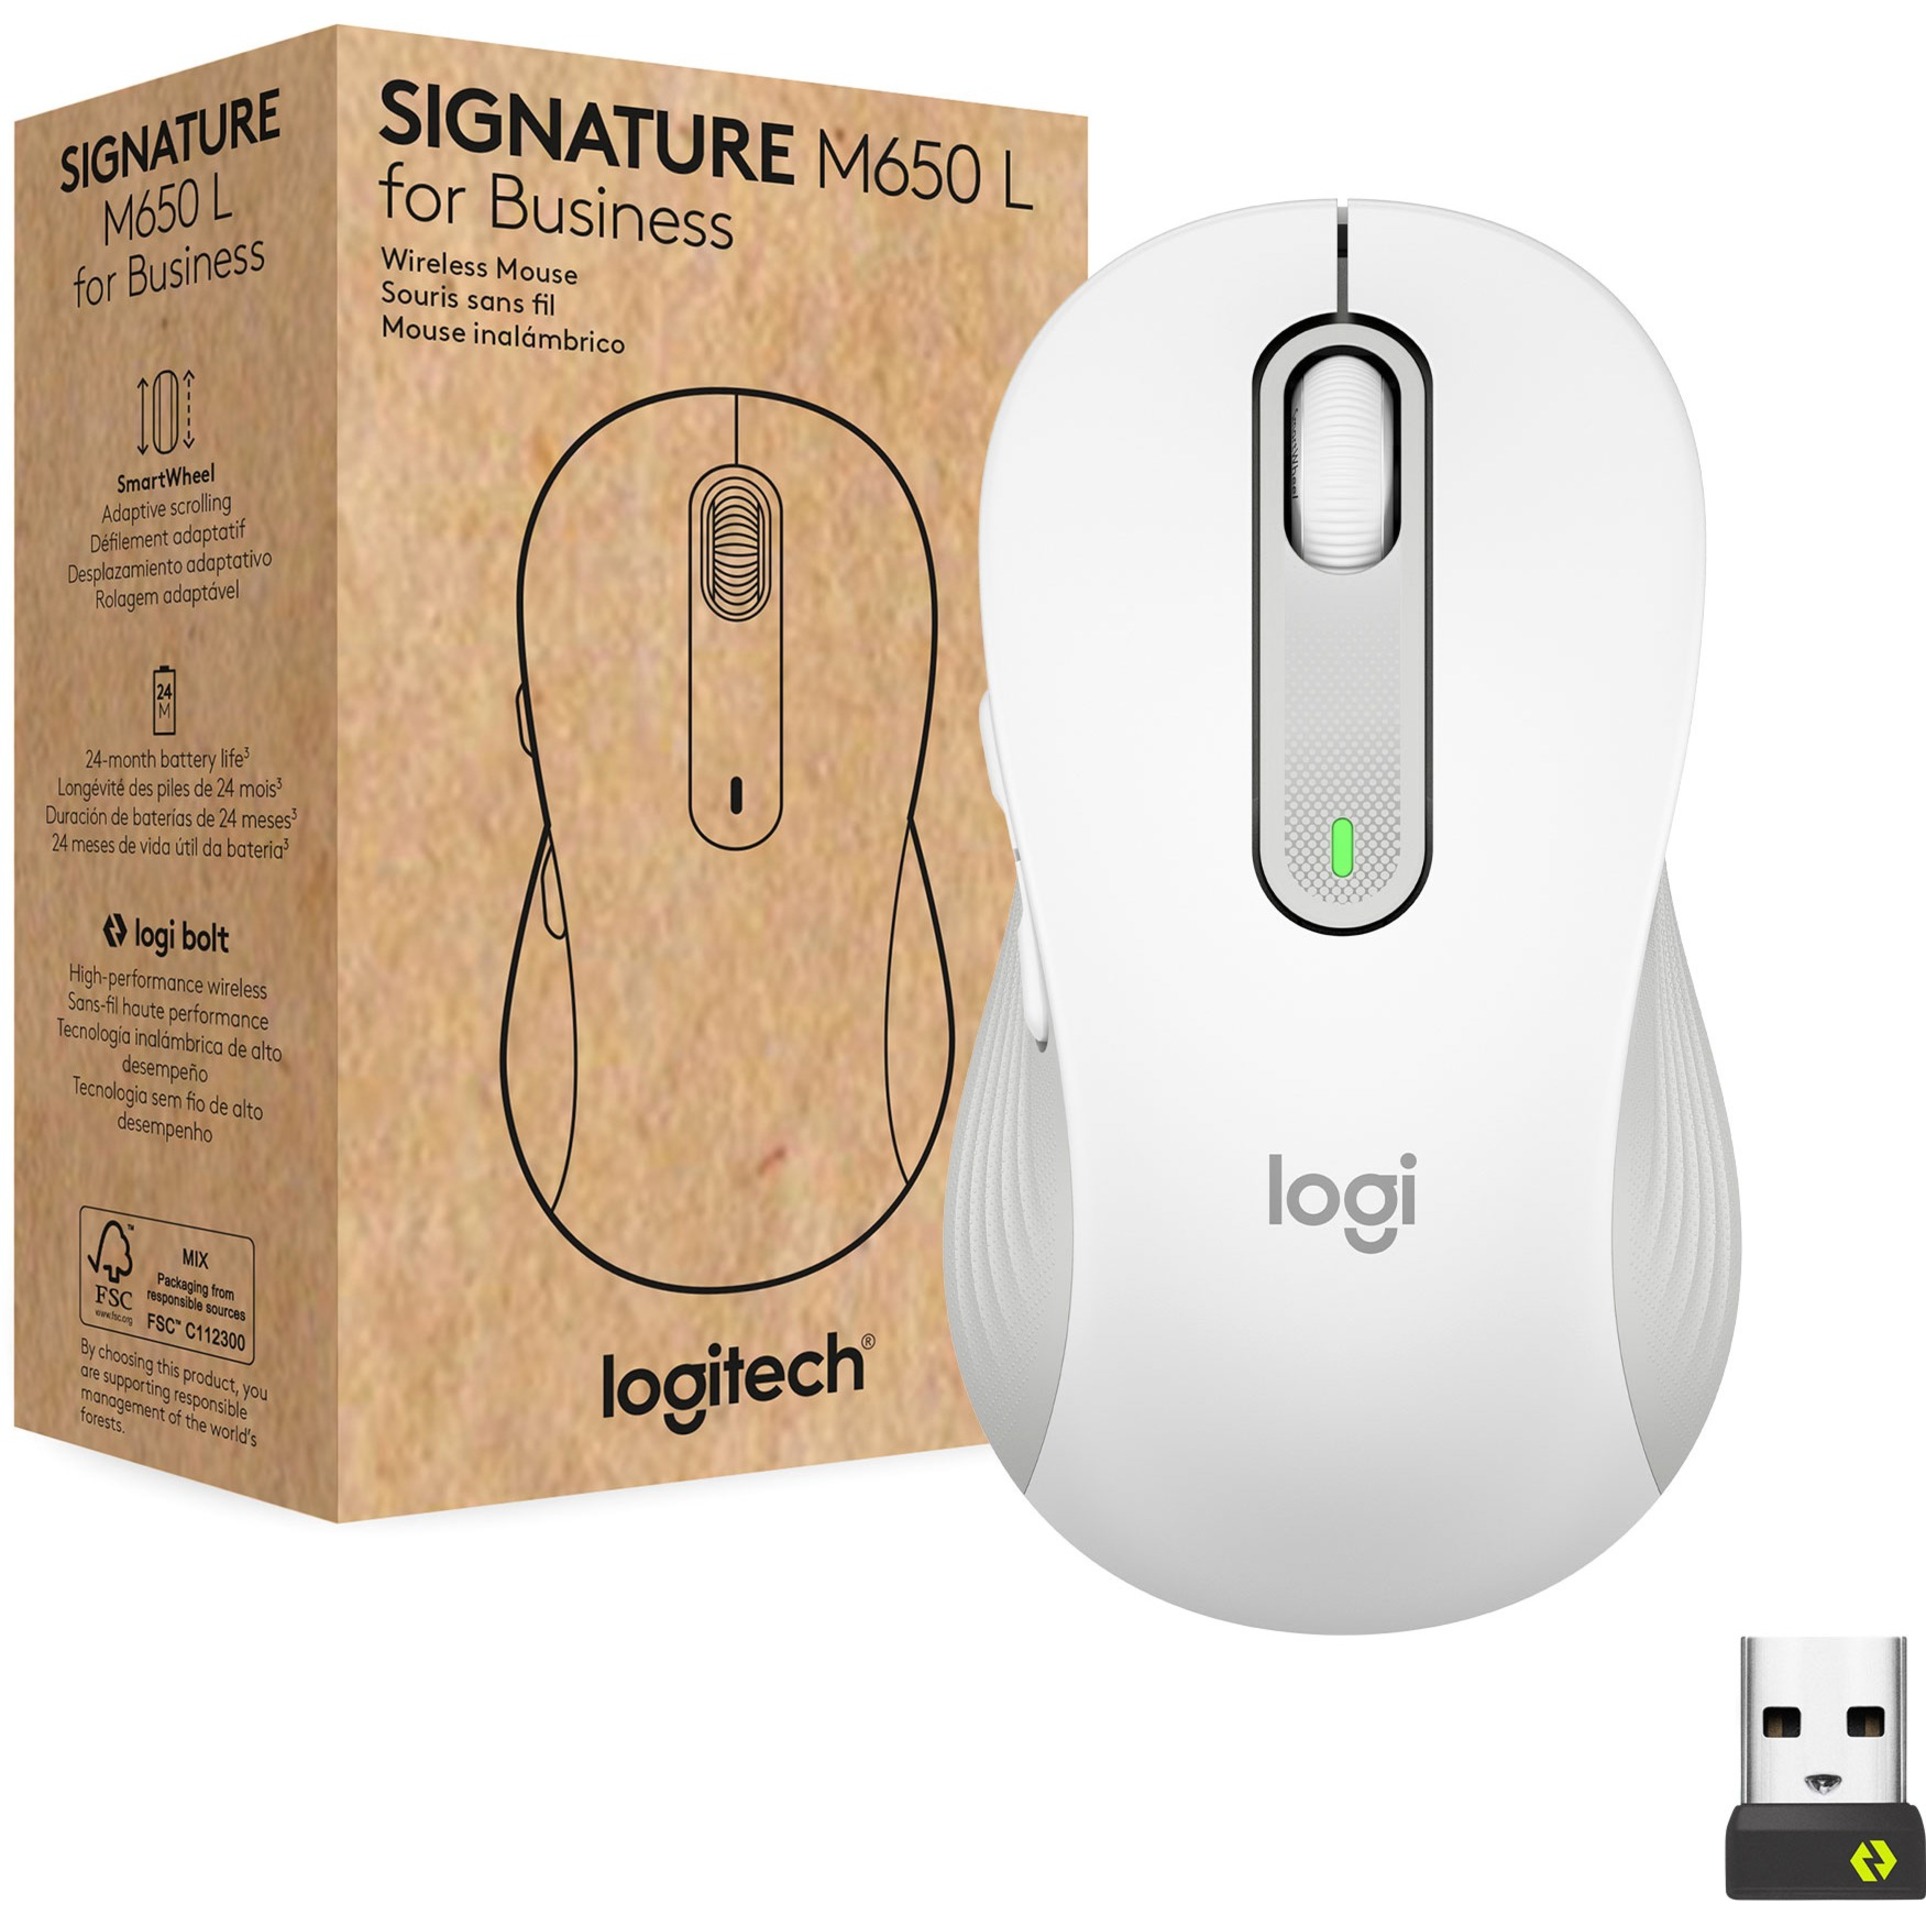 Logitech Signature M650 for Business (Off-white) - Brown Box